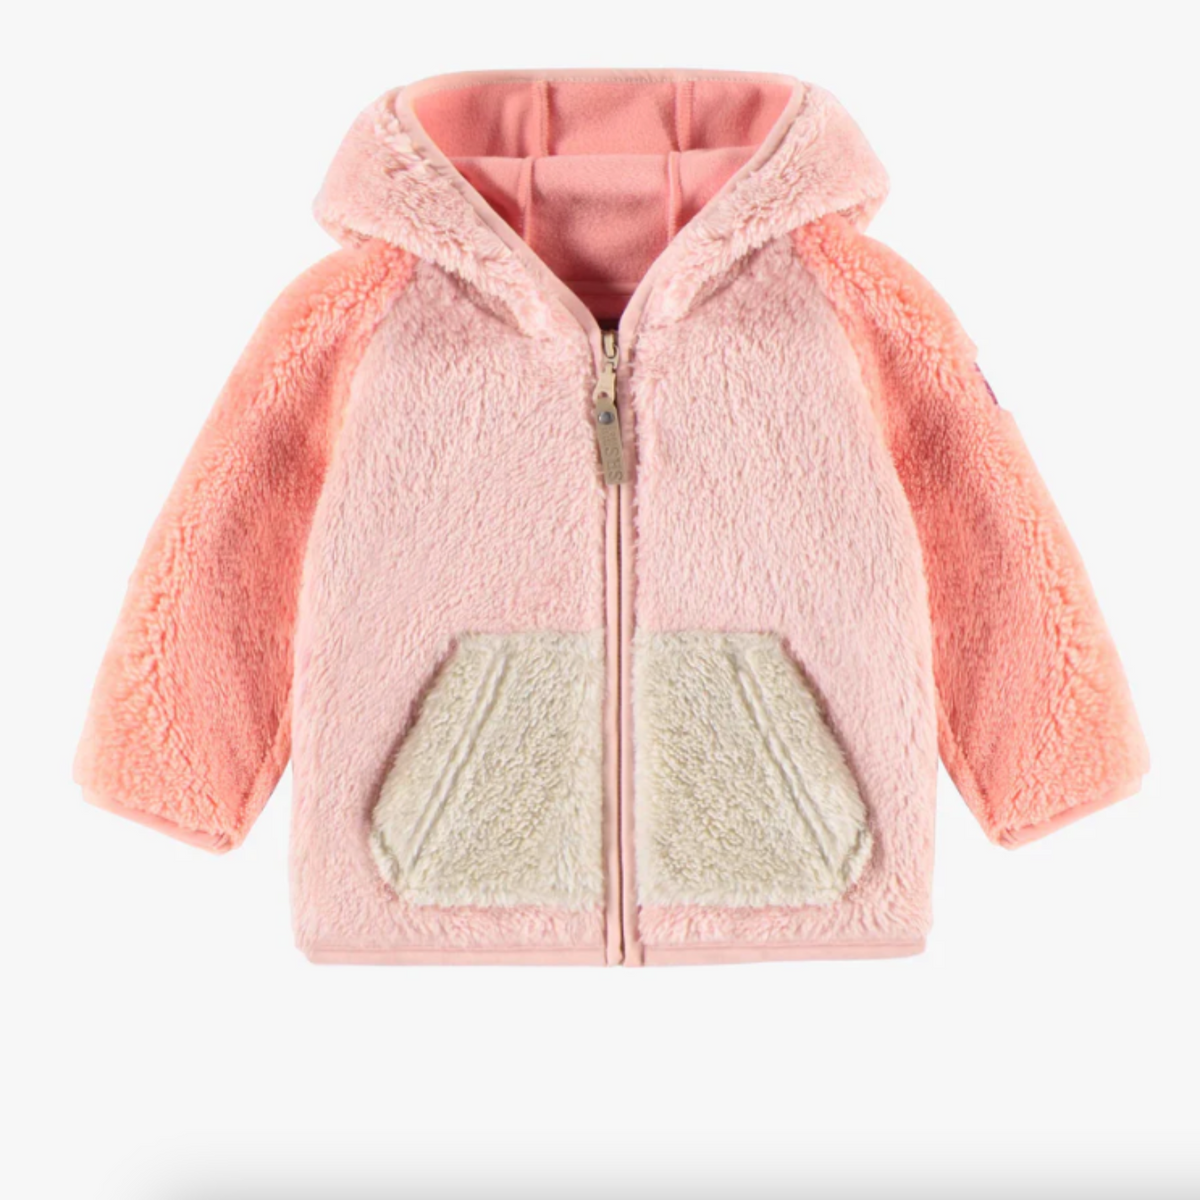 Pink Sherpa Jacket with Hood, Toddler